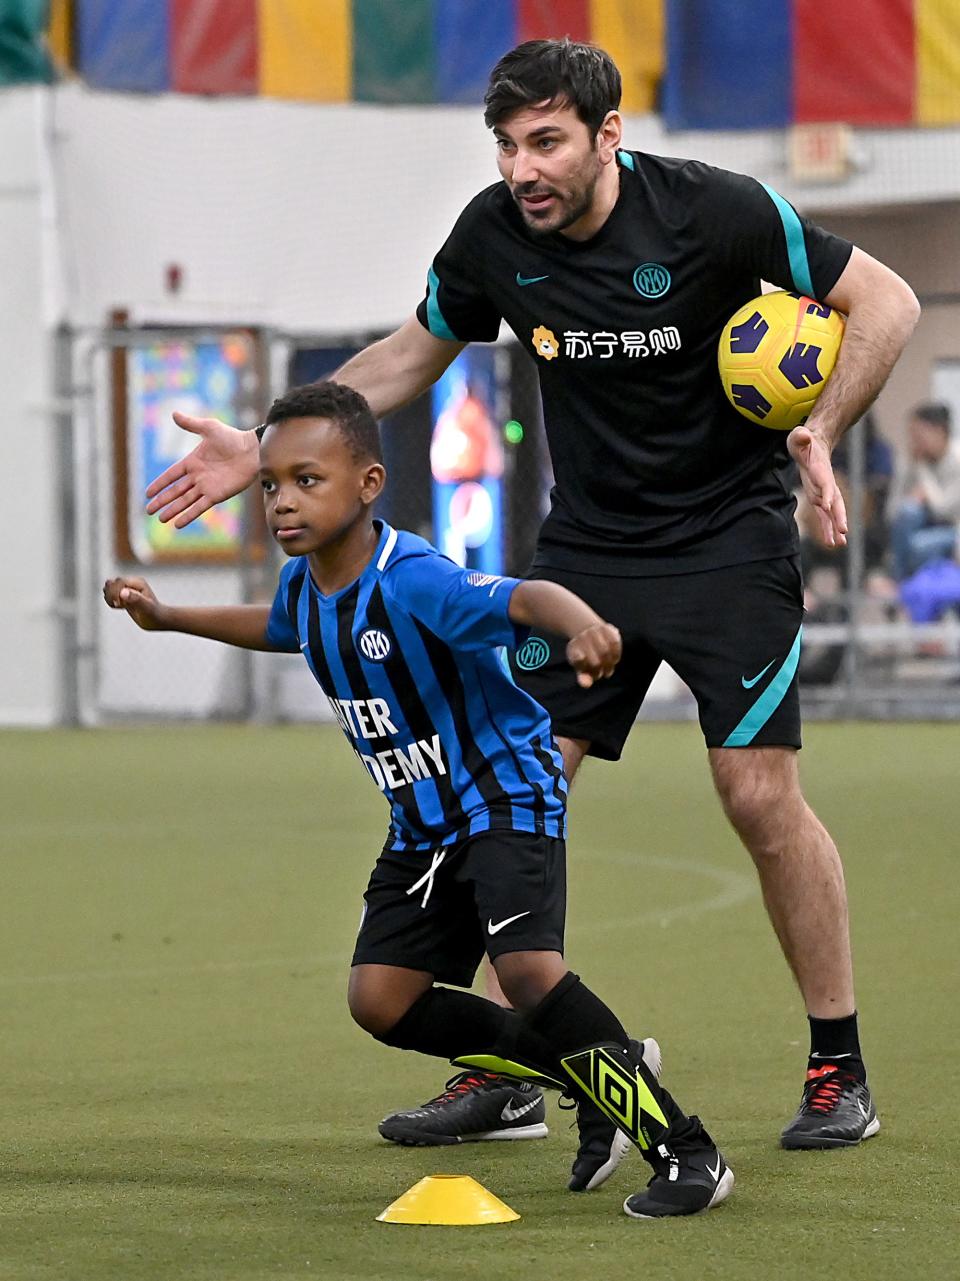 Christian Saintima, 6, of Framingham, learns soccer under the watchful eye of Luigi Mainolfi, a coach from an elite youth soccer academy in Milan, Italy, during an Inter Academy Metro West Boston practice at SMOC's Community and Cultural Center in Framingham, April 6, 2022. Mainolfi will be in Framingham for two weeks to train local Academy MetroWest Boston coaches and work with youth soccer players in MetroWest.